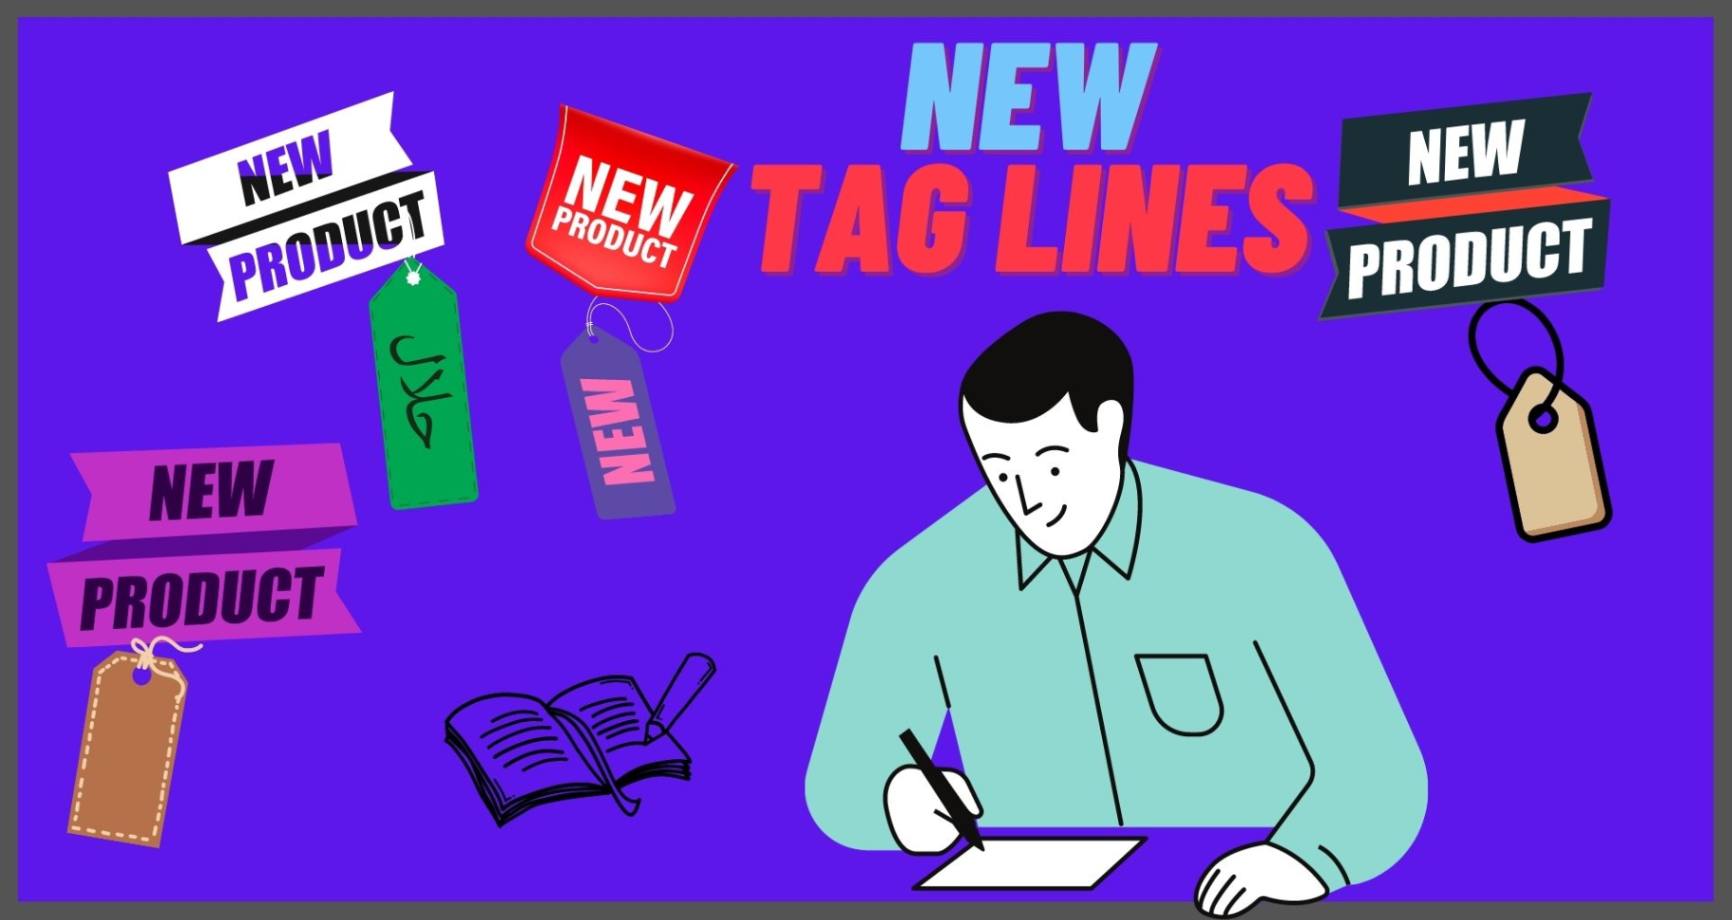 Tag lines for products or services- graphics of man writing tags on purple background